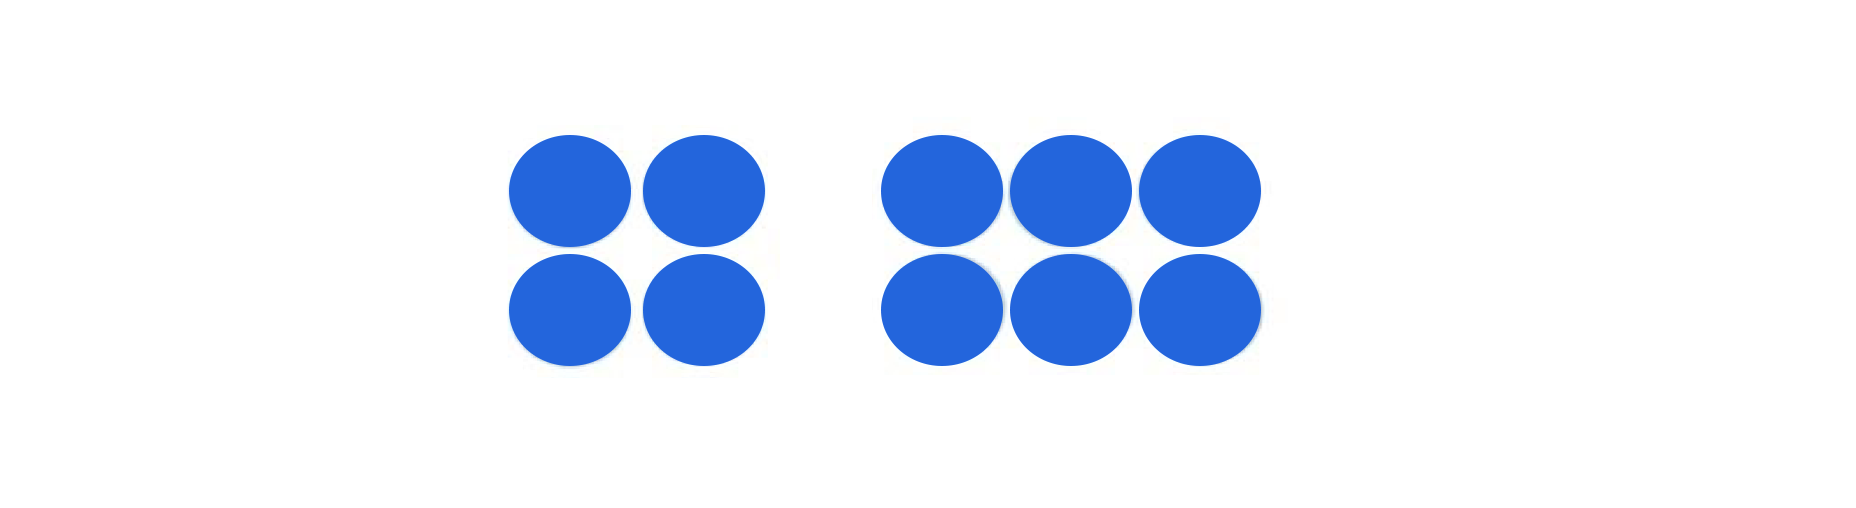 Two groups of circles